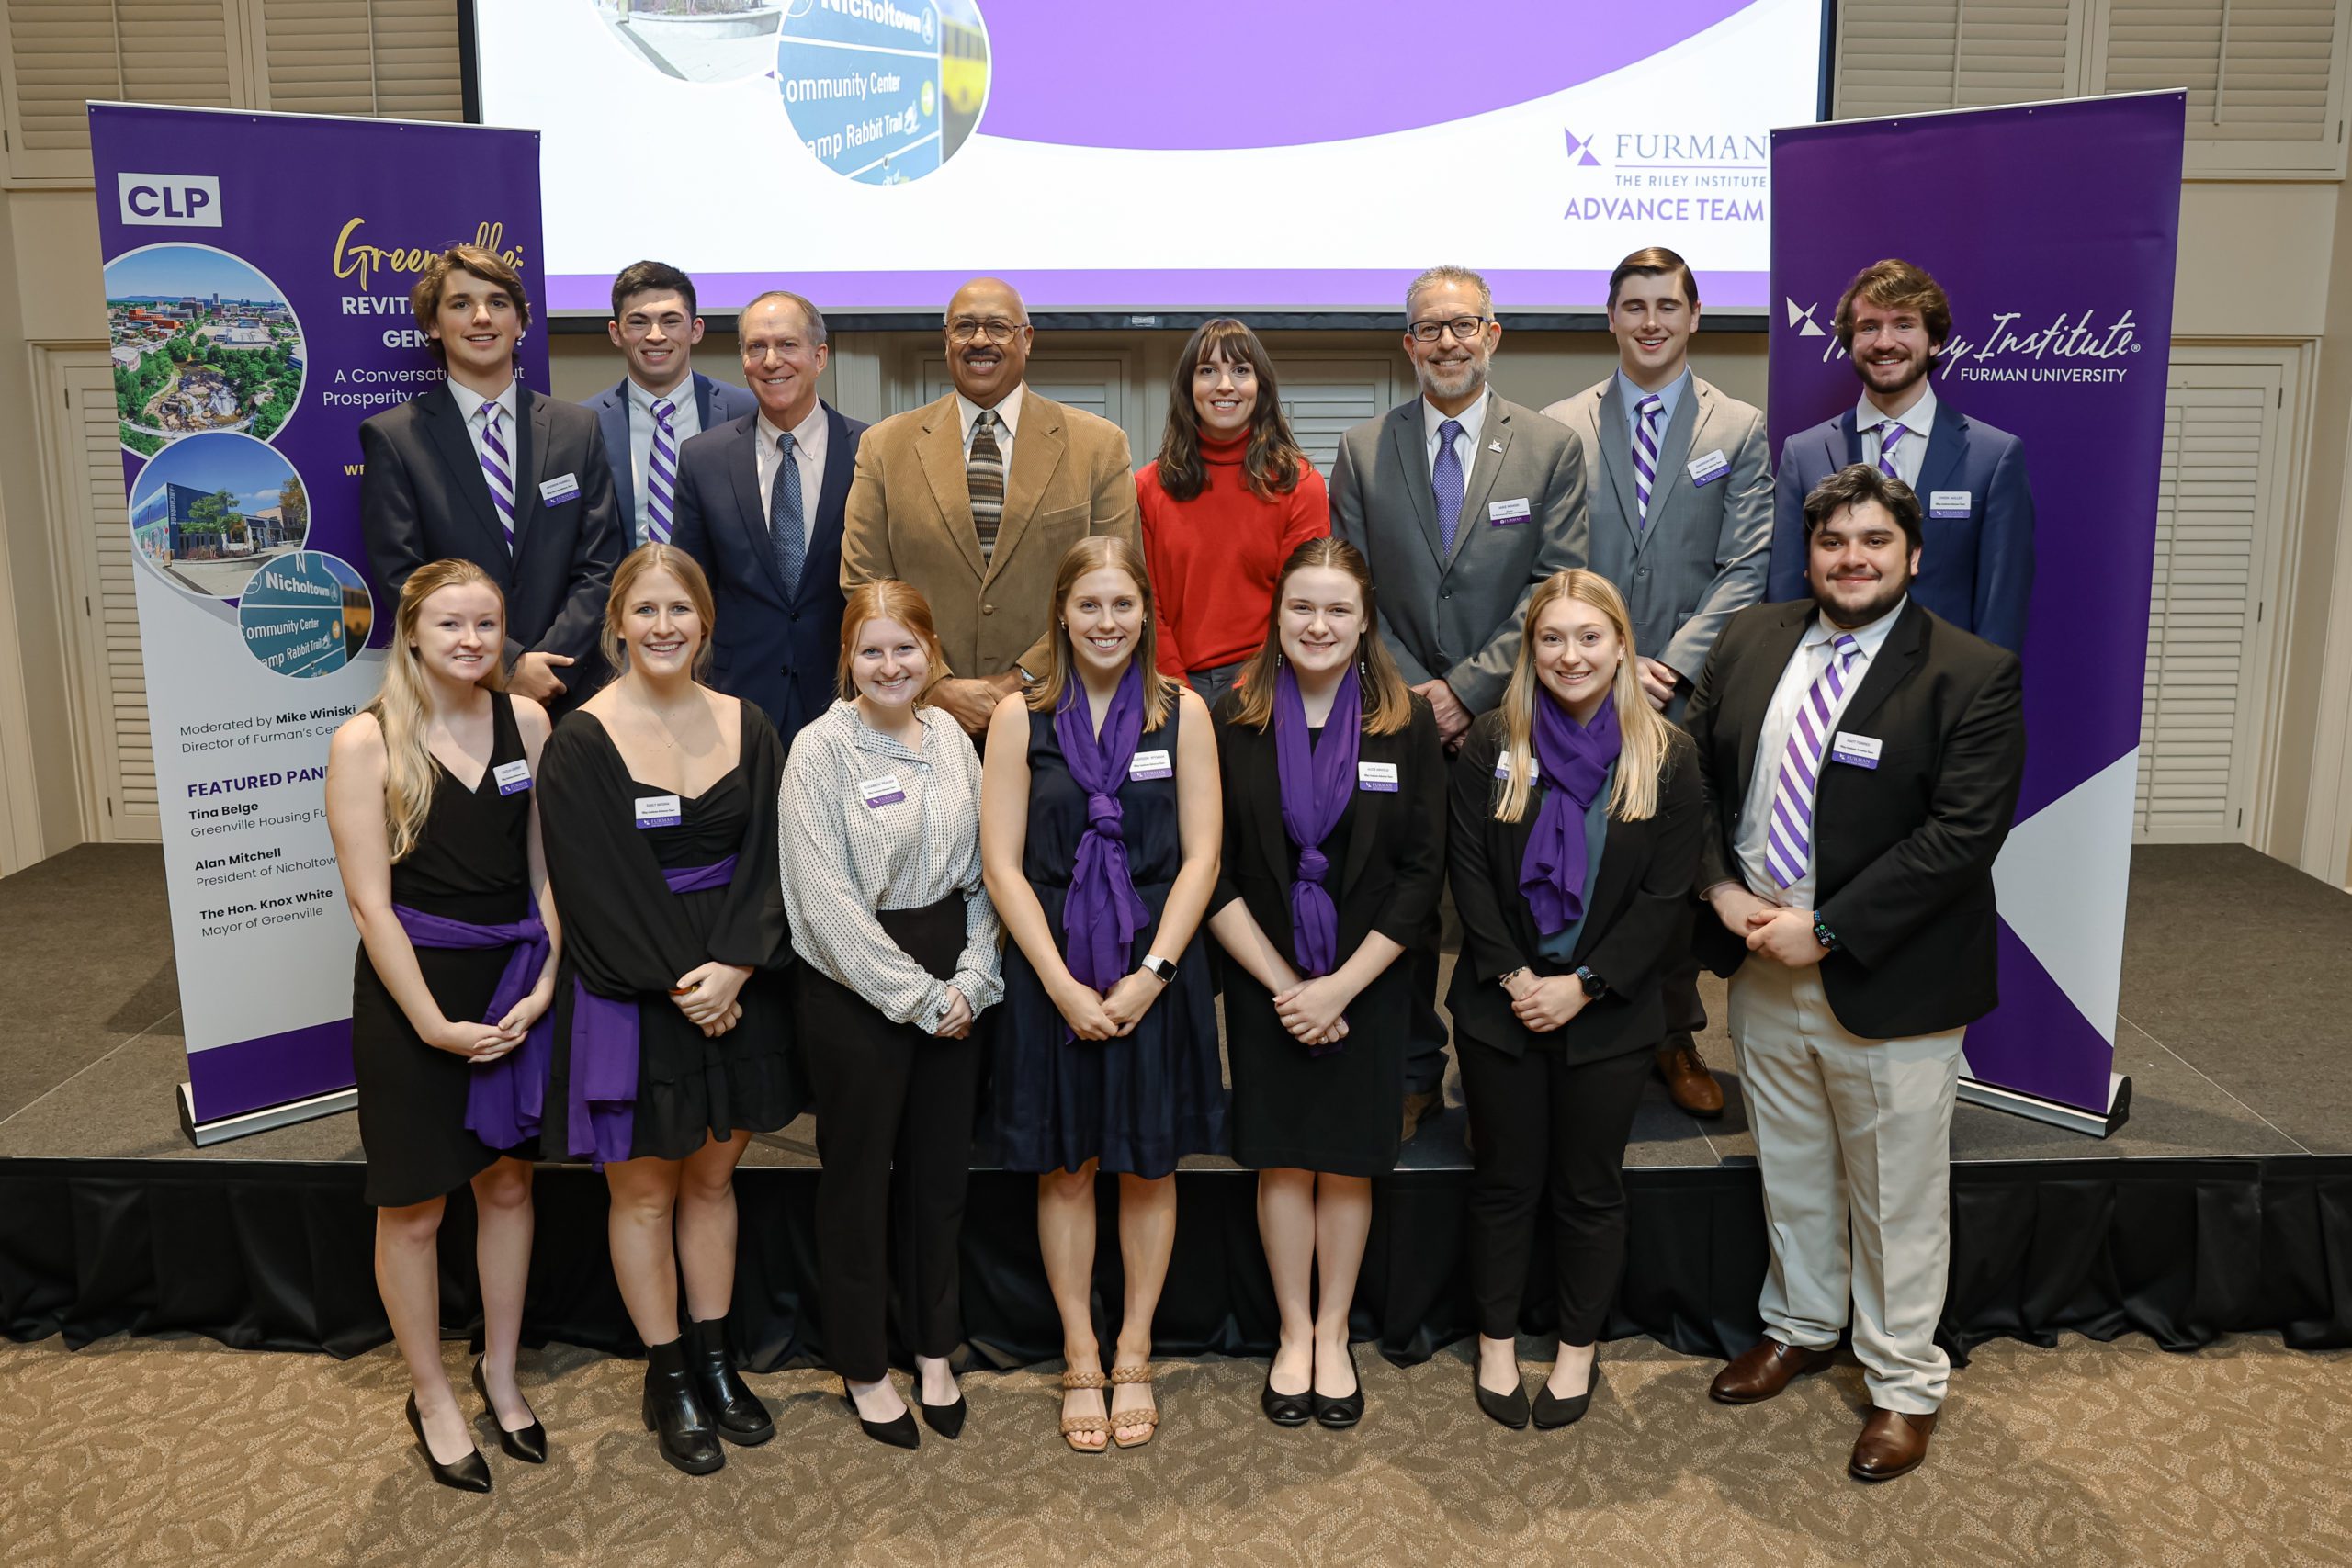 The event was created and implemented by the Riley Advance Team, a select group of Furman students who act as ambassadors for Furman and the Riley Institute at campus events.